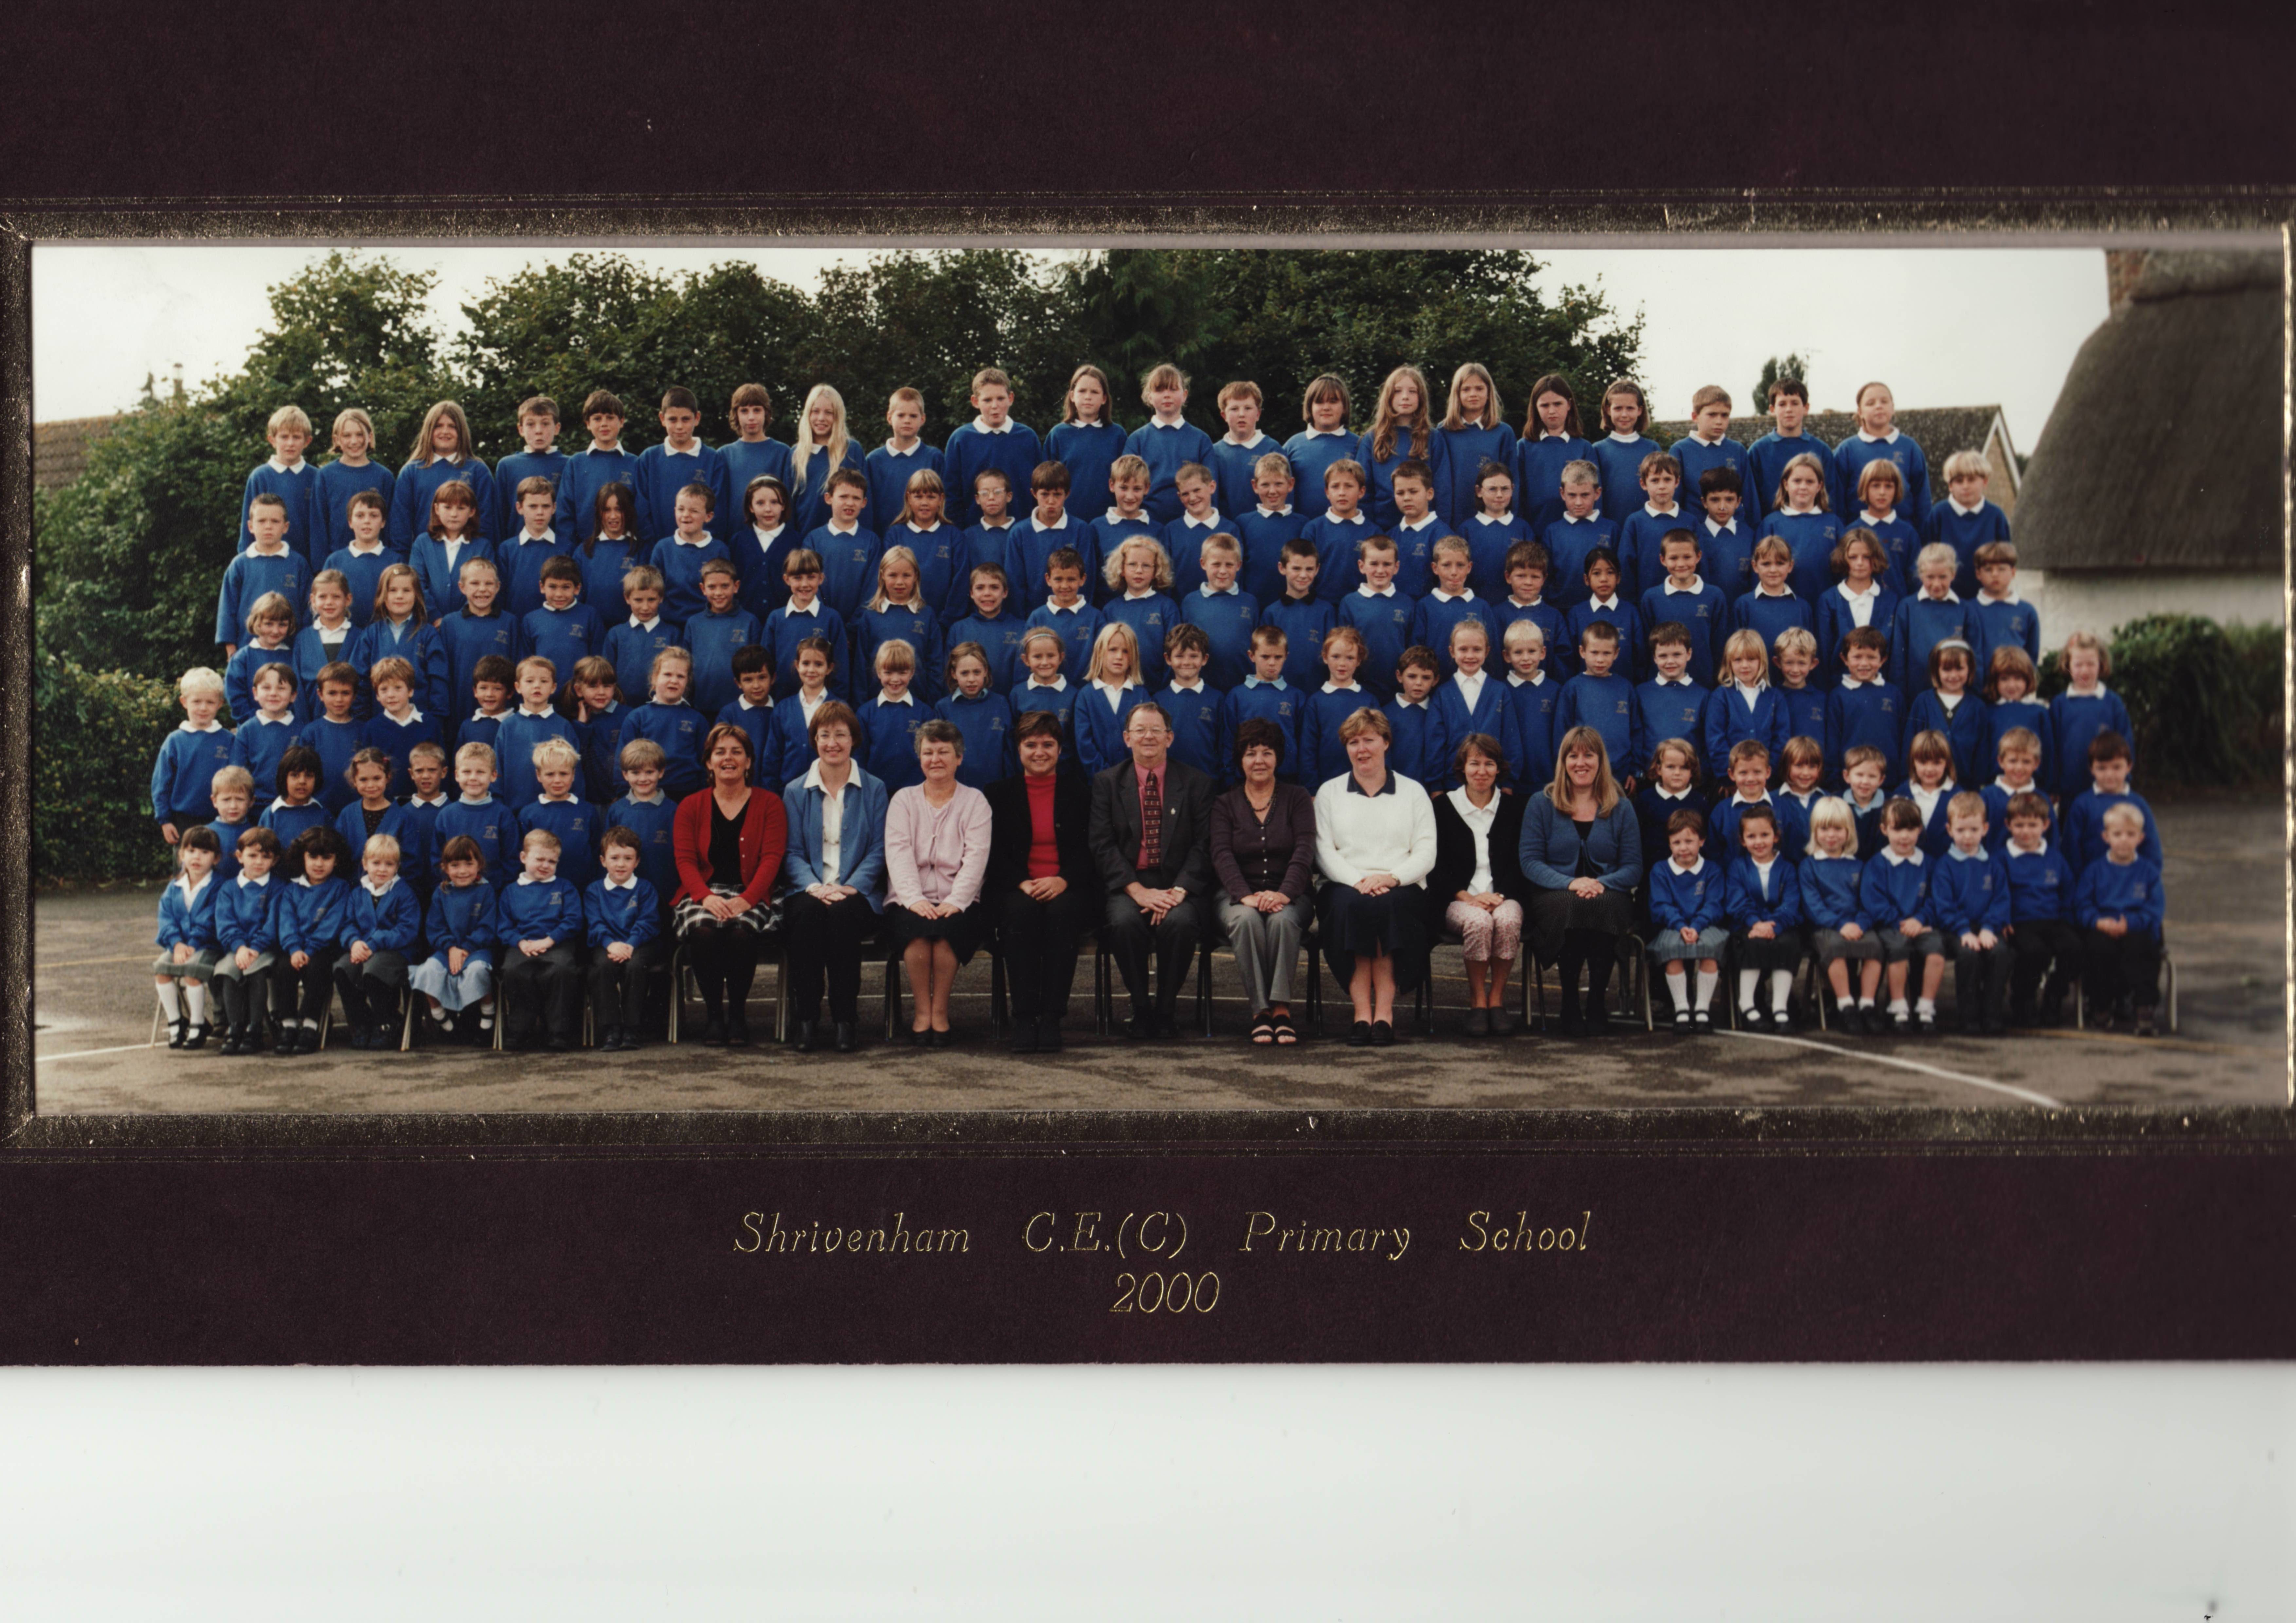 The whole school at the year 2000